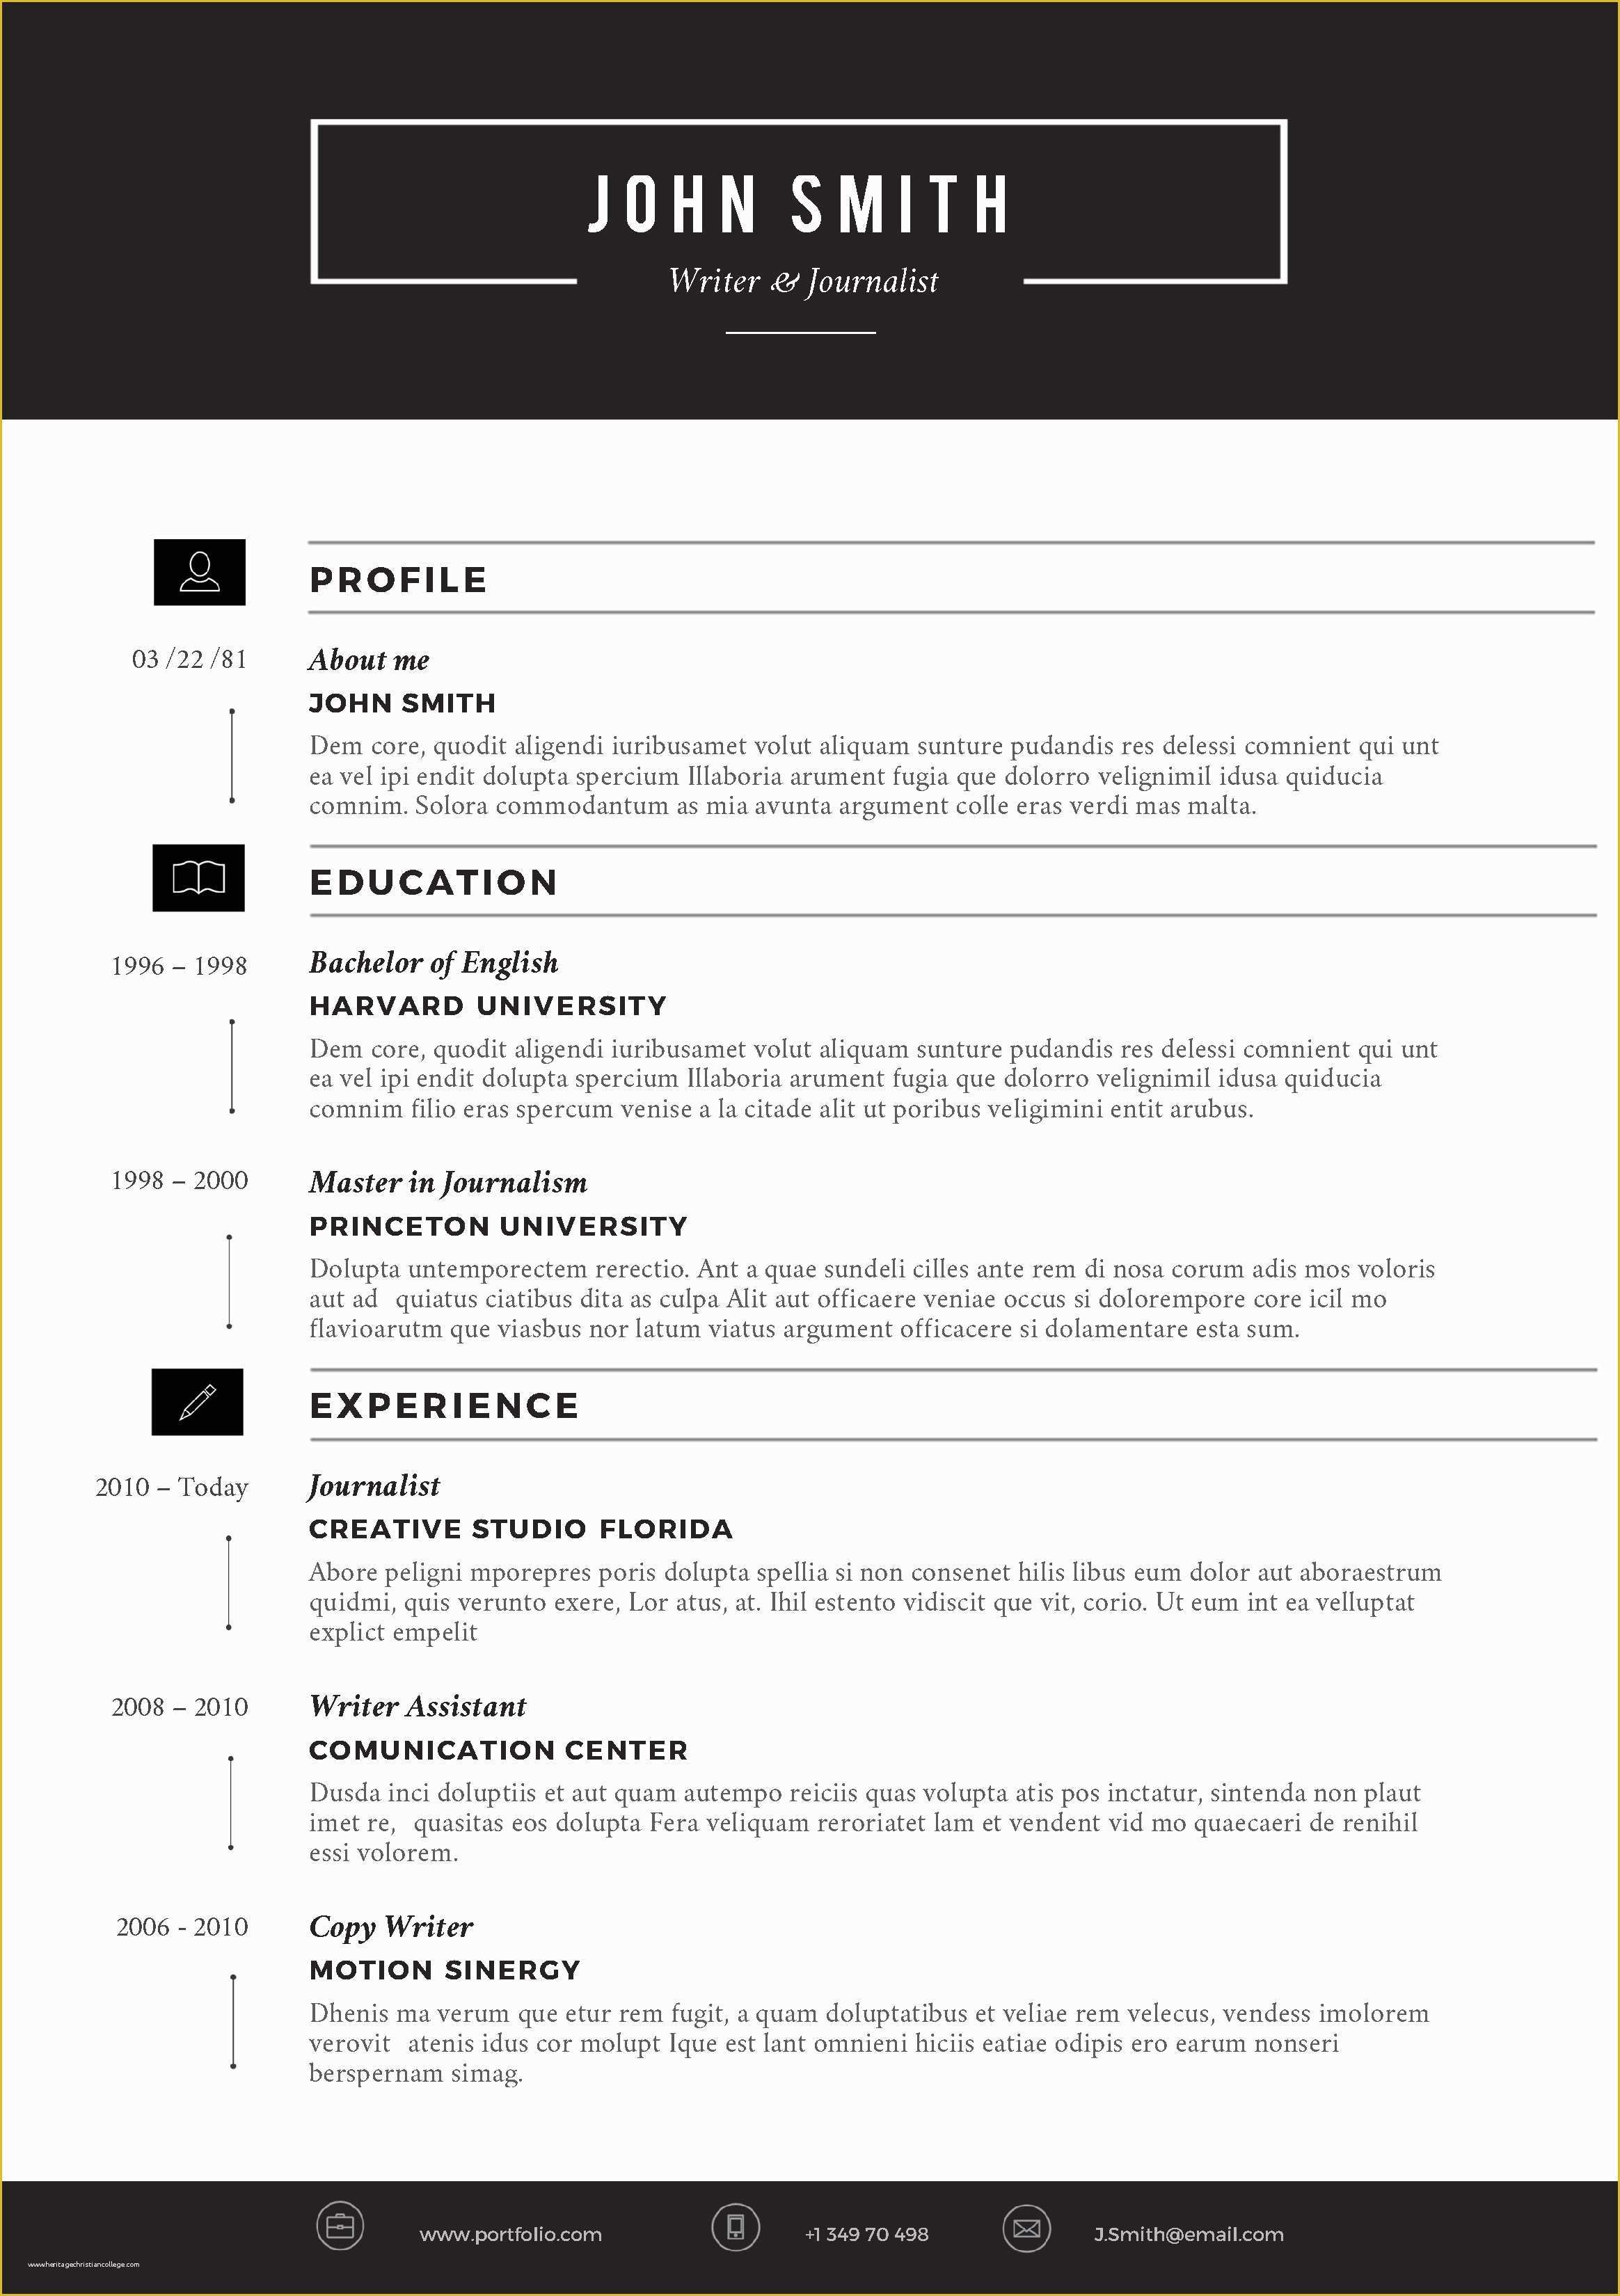 Resume Templates Free Download for Microsoft Word Of Fice Resume Template Cover Letter Portfolio